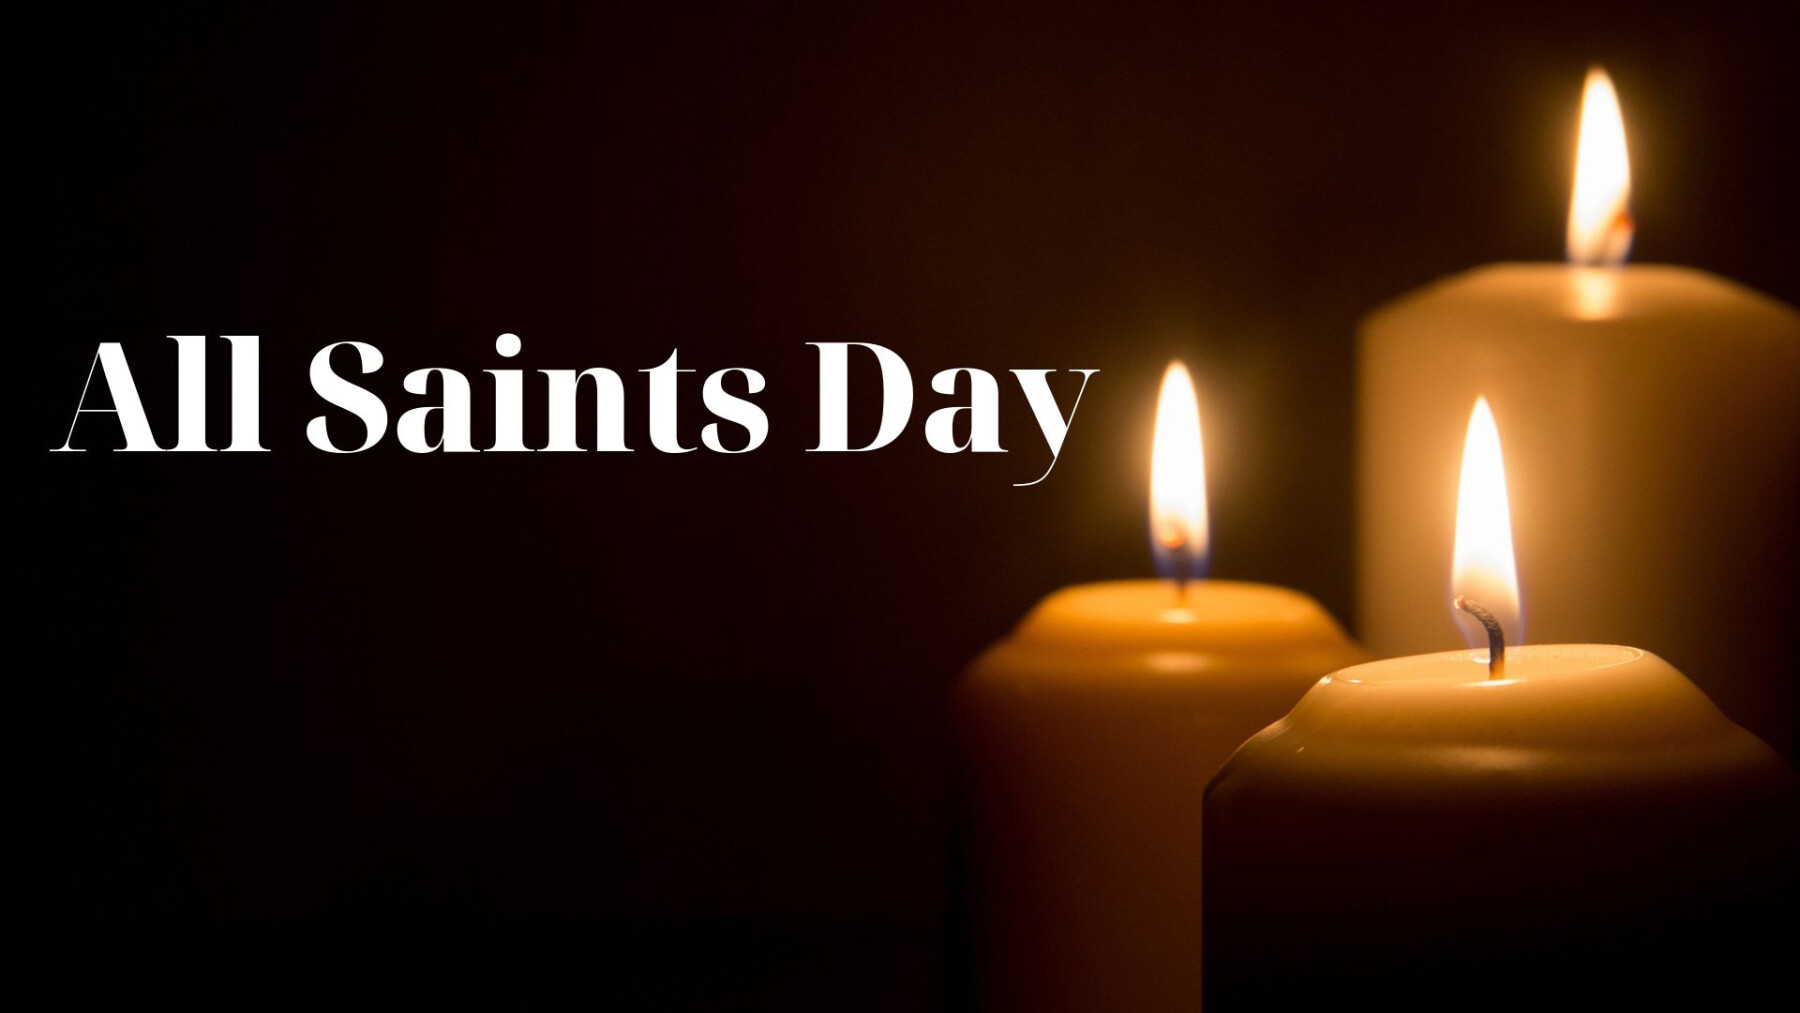  All Saints Day